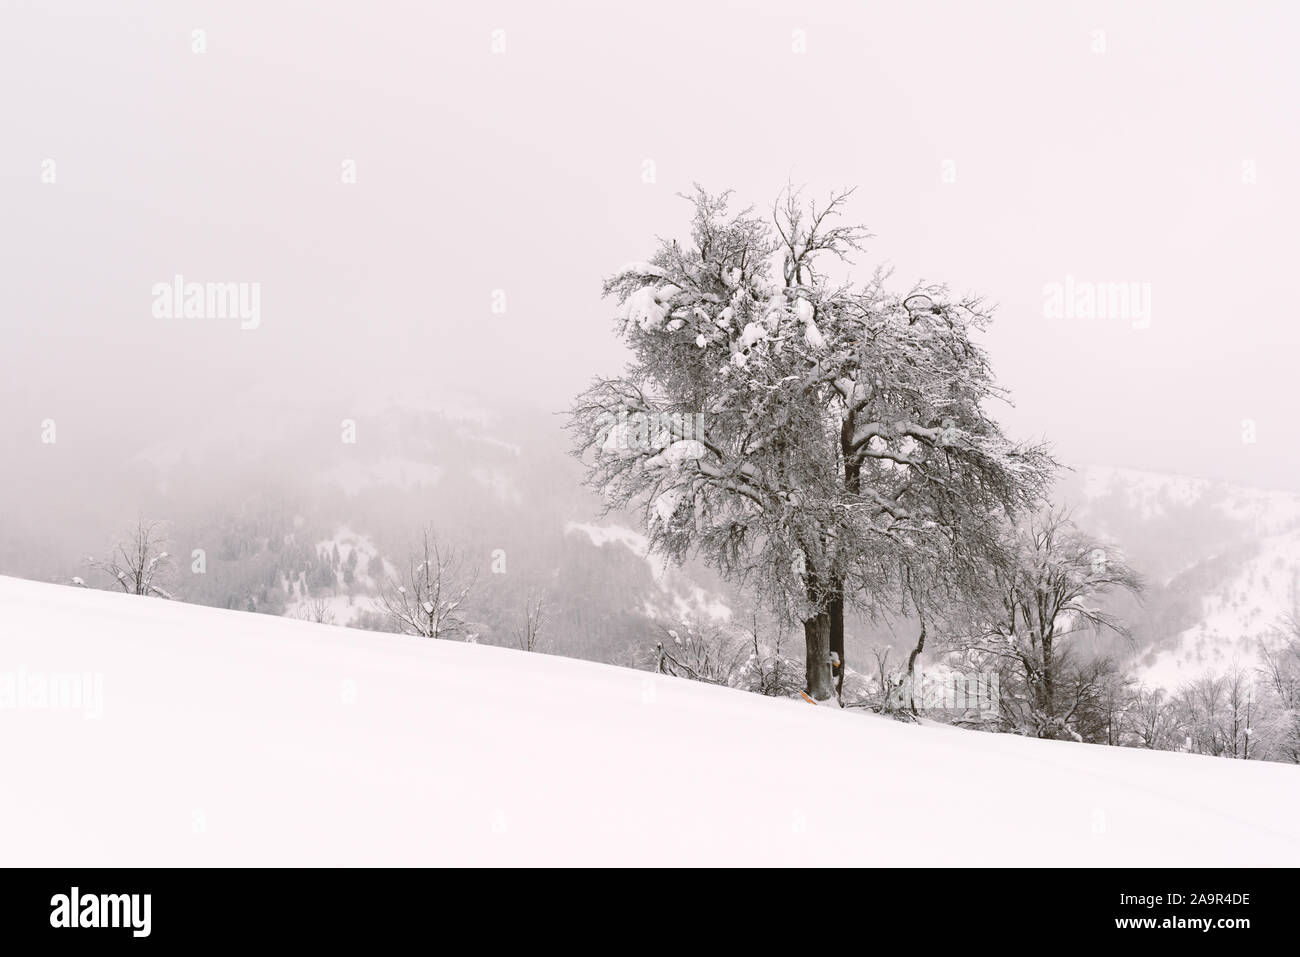 Minimalistic winter landscape in cloudy weather with snowy trees. Carpathian mountains, Landscape photography Stock Photo